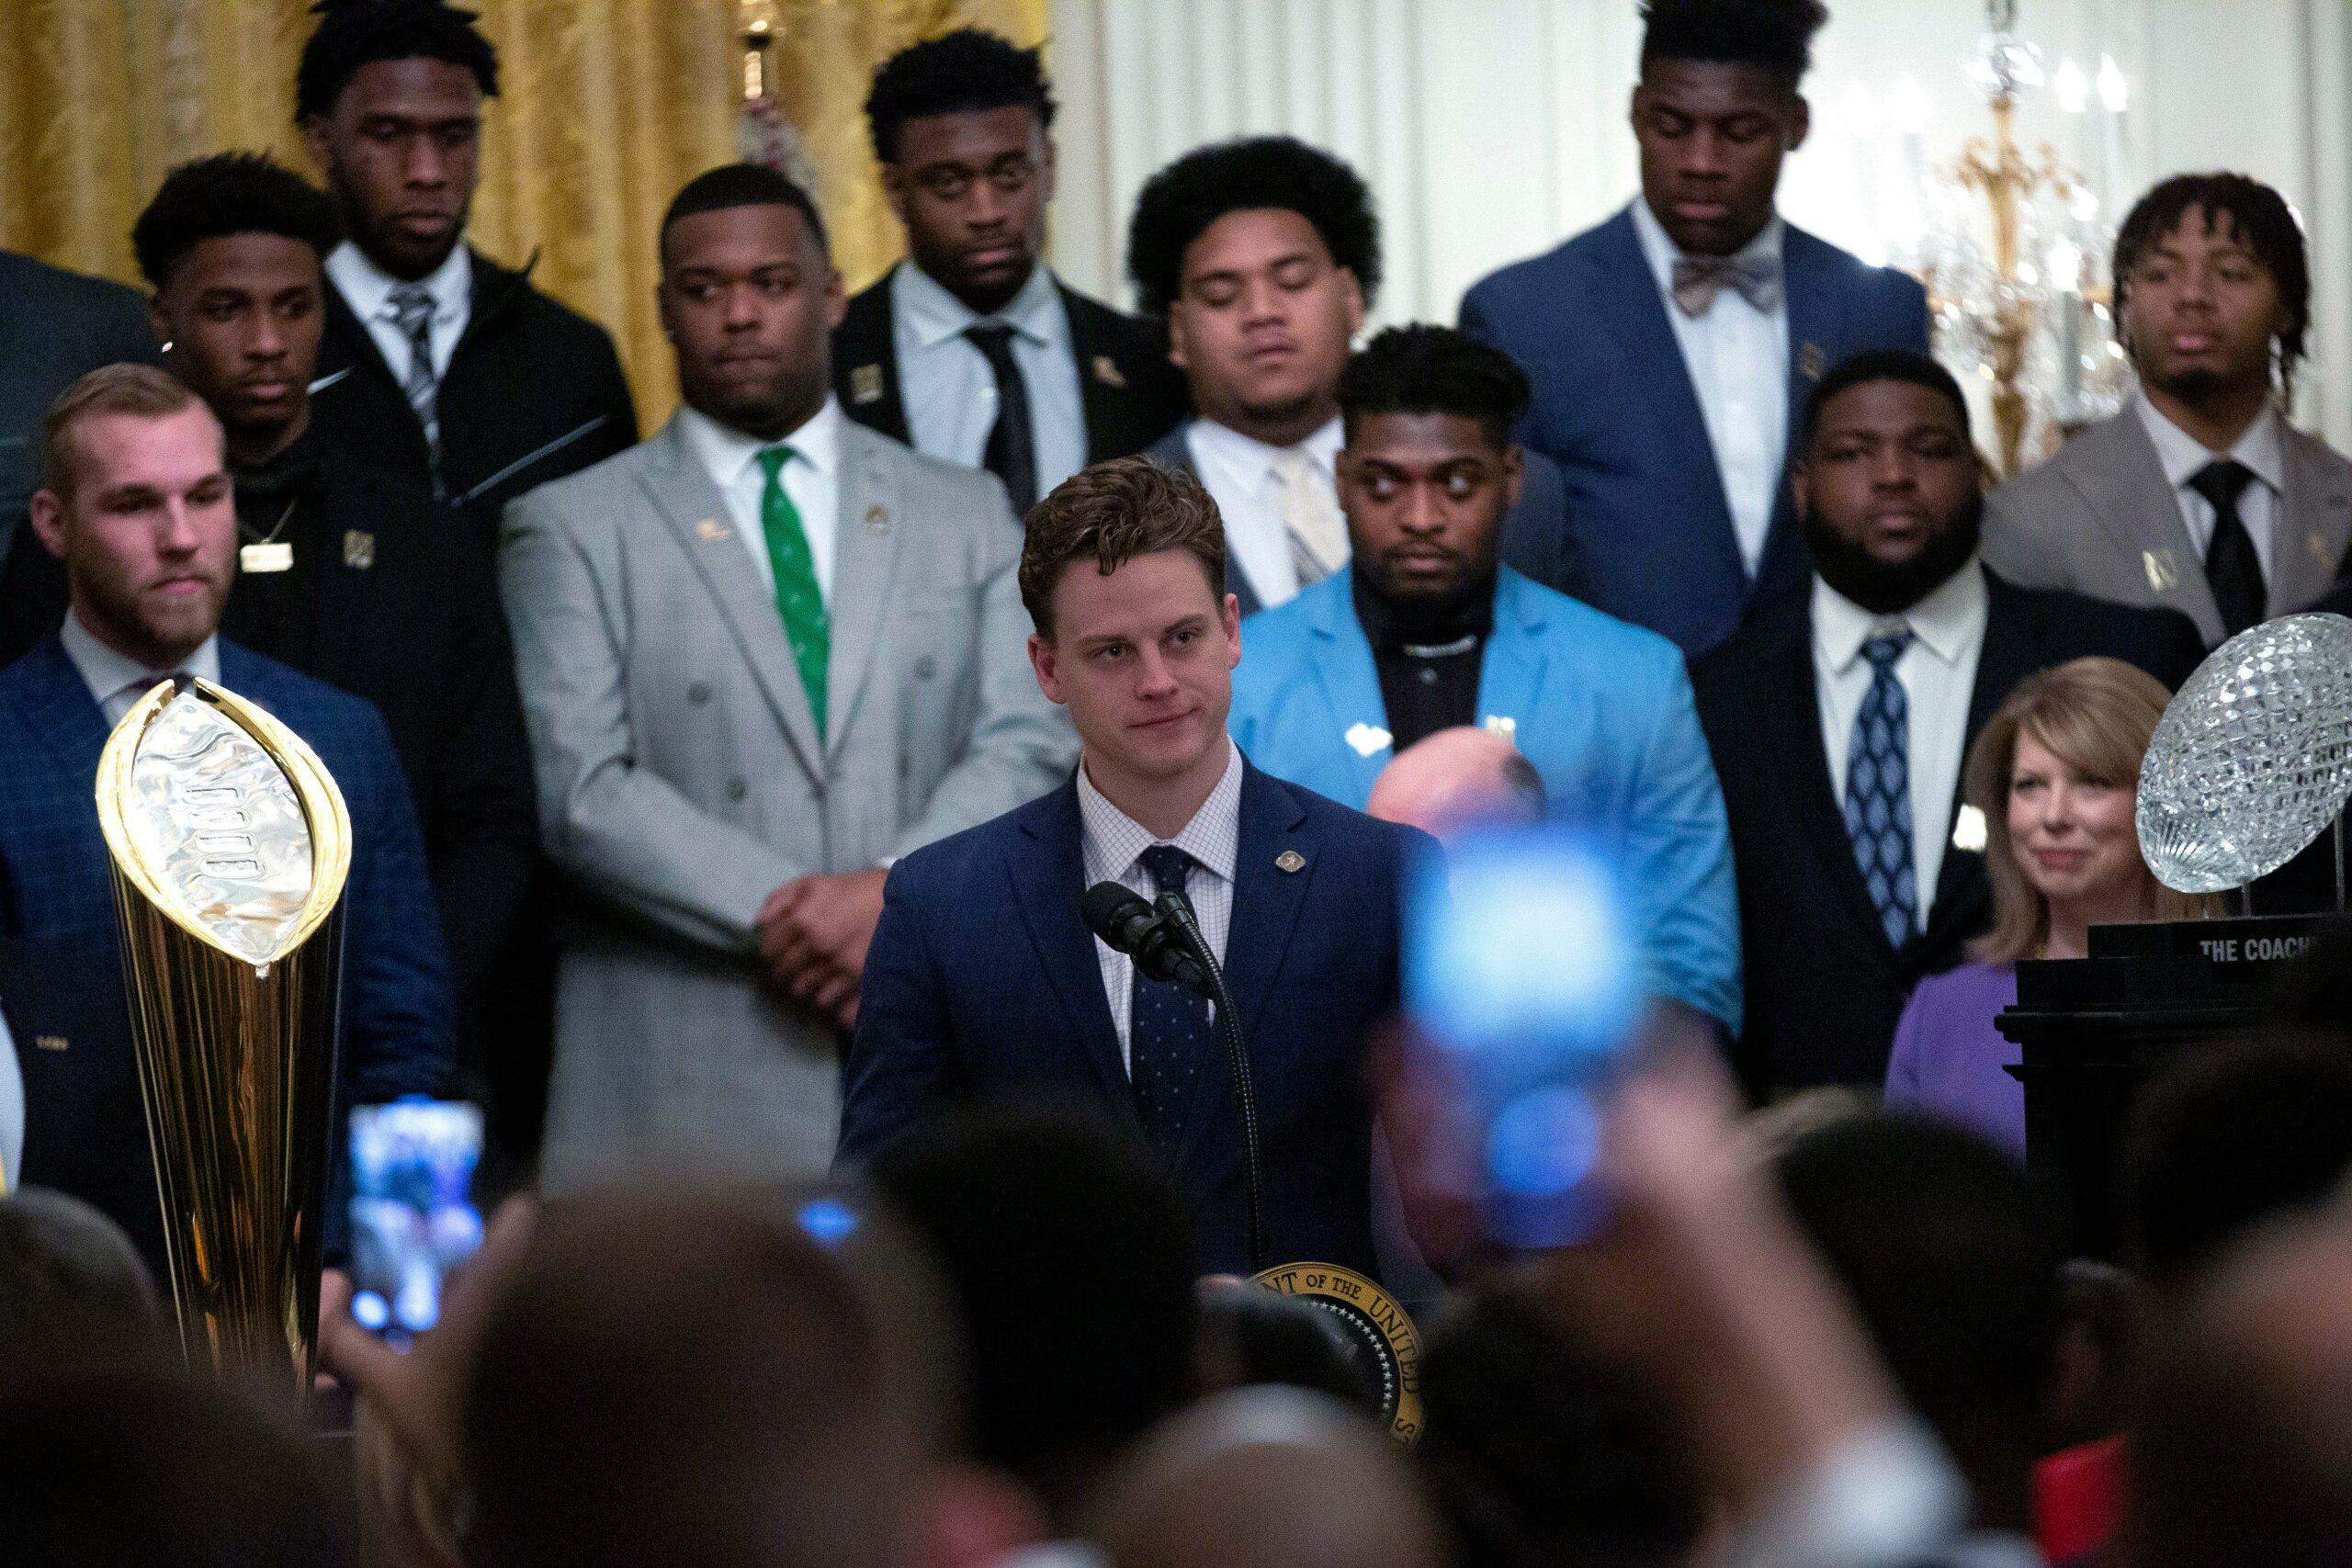 United States President Donald J Trump Hosts the 2019 College Football National Chamions